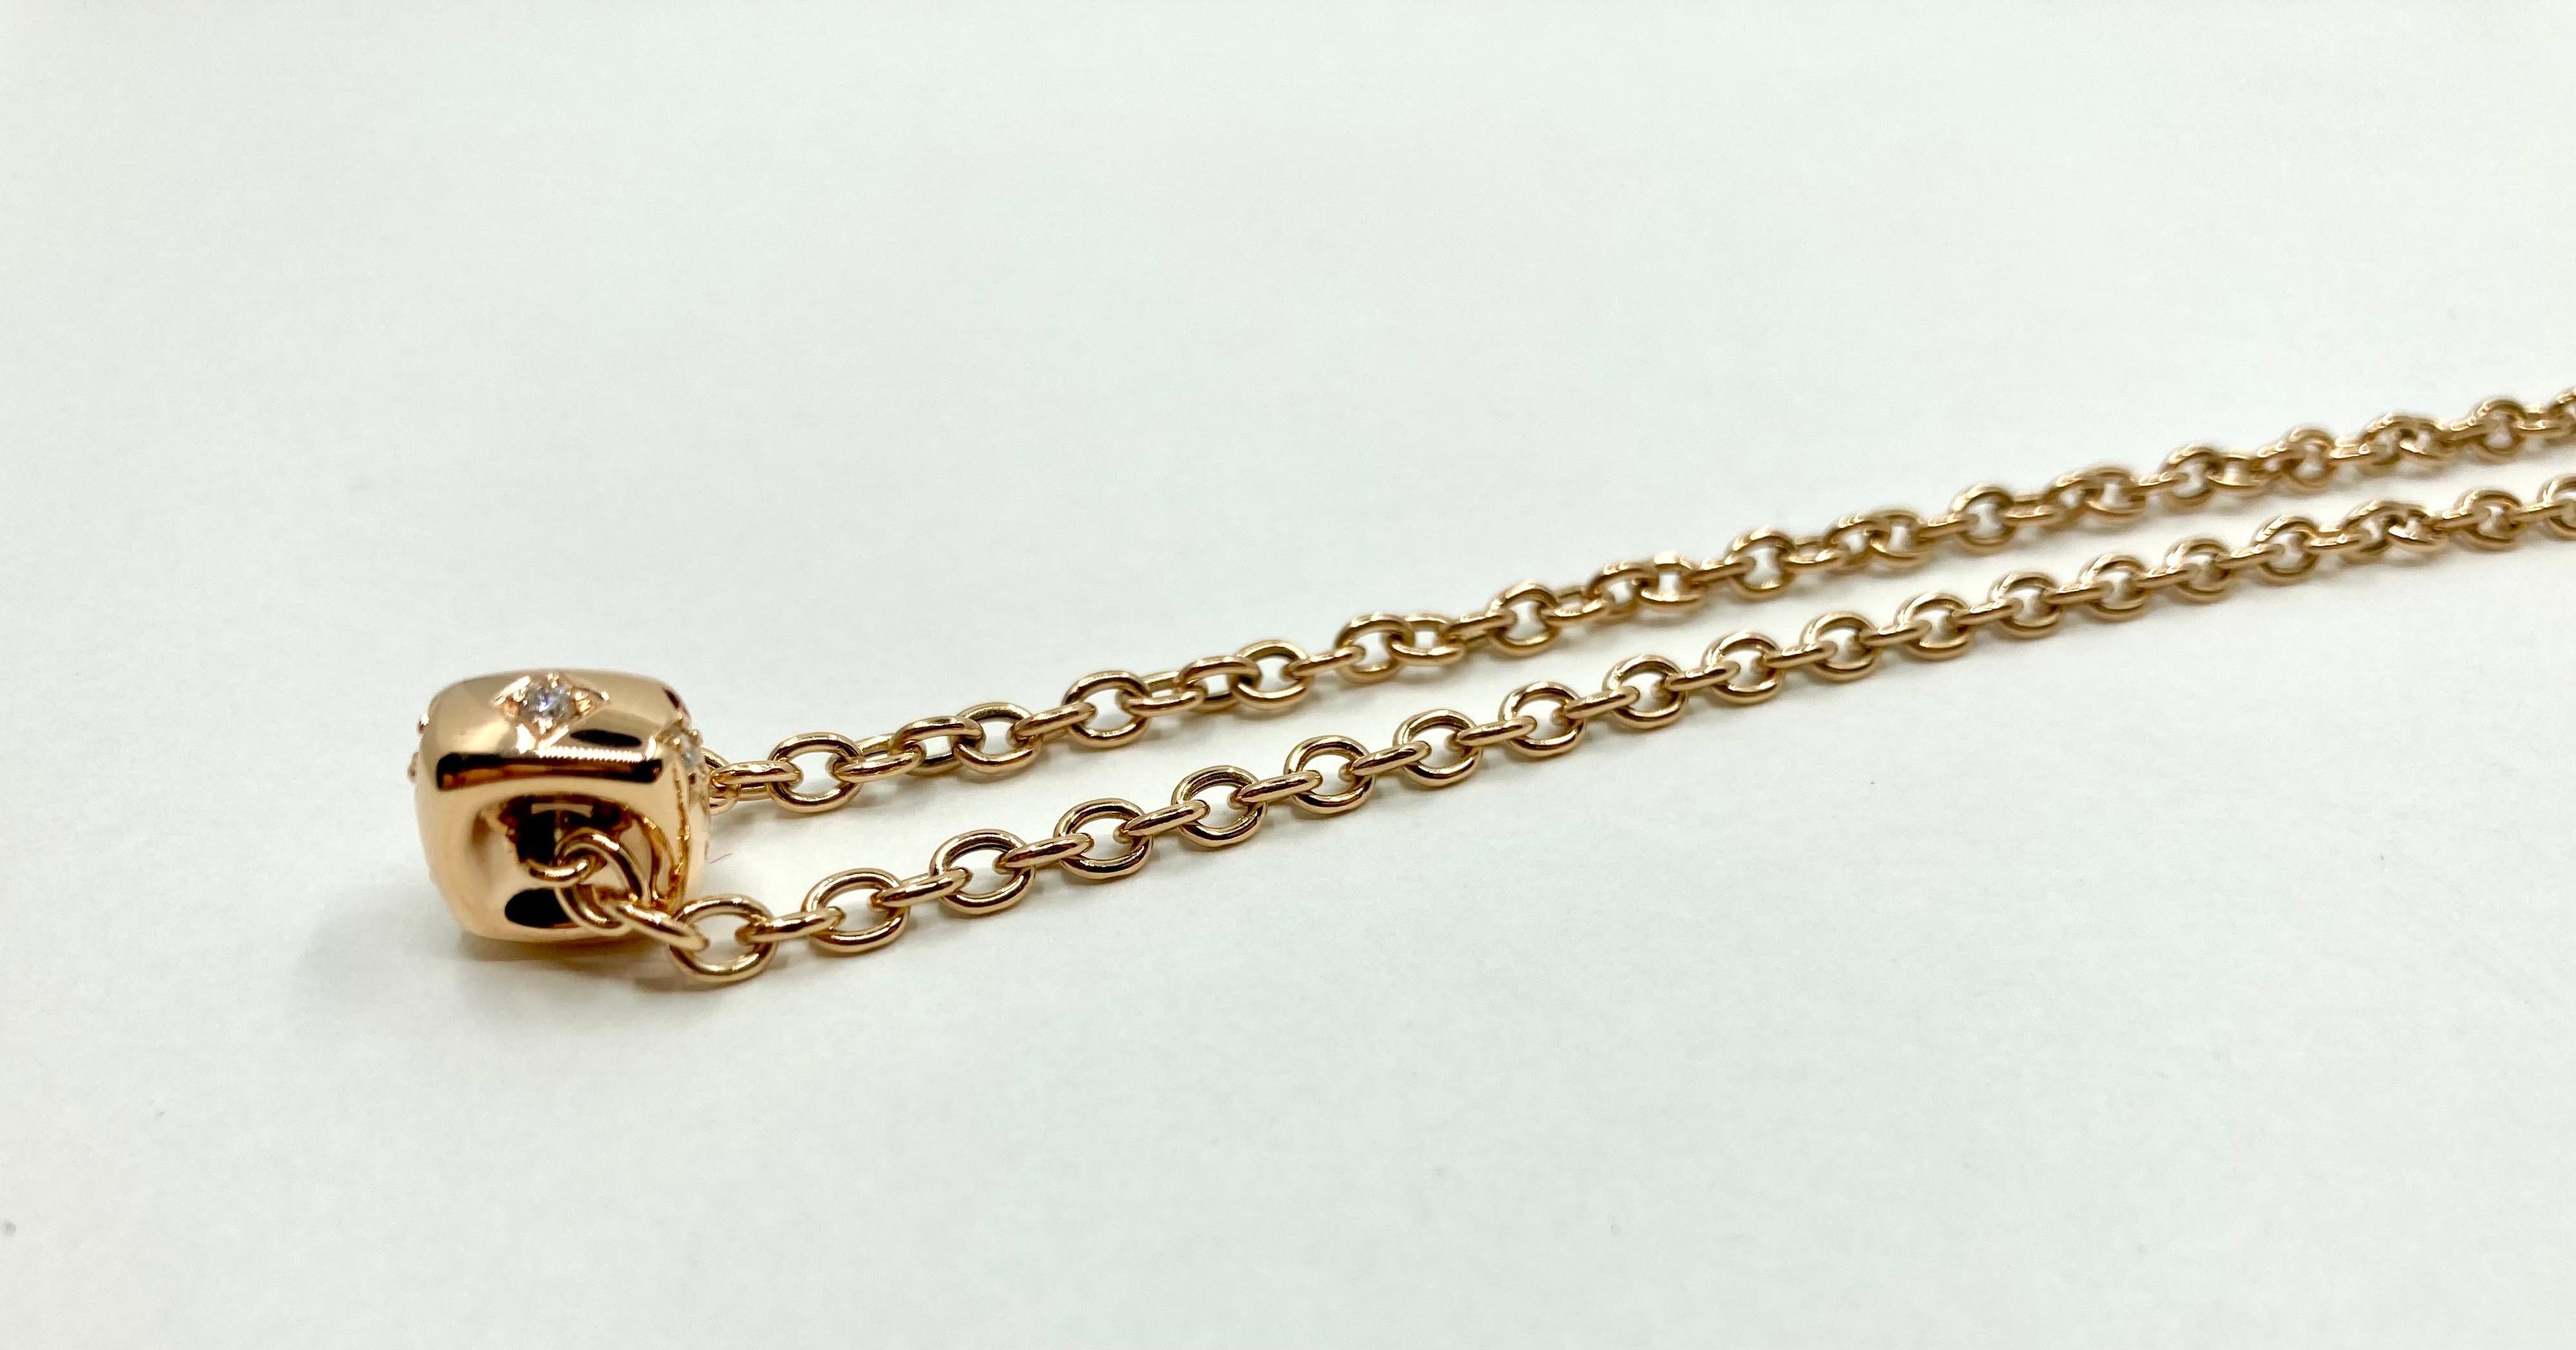 Timeless elengat Rose Gold necklace, with diamonds ct. 0.15, Made in Italy by Roberto Casarin. 

Small details always make a difference, and this necklace is no exception. Casual yet stylish, its easy wearable design makes it a perfect gift and a